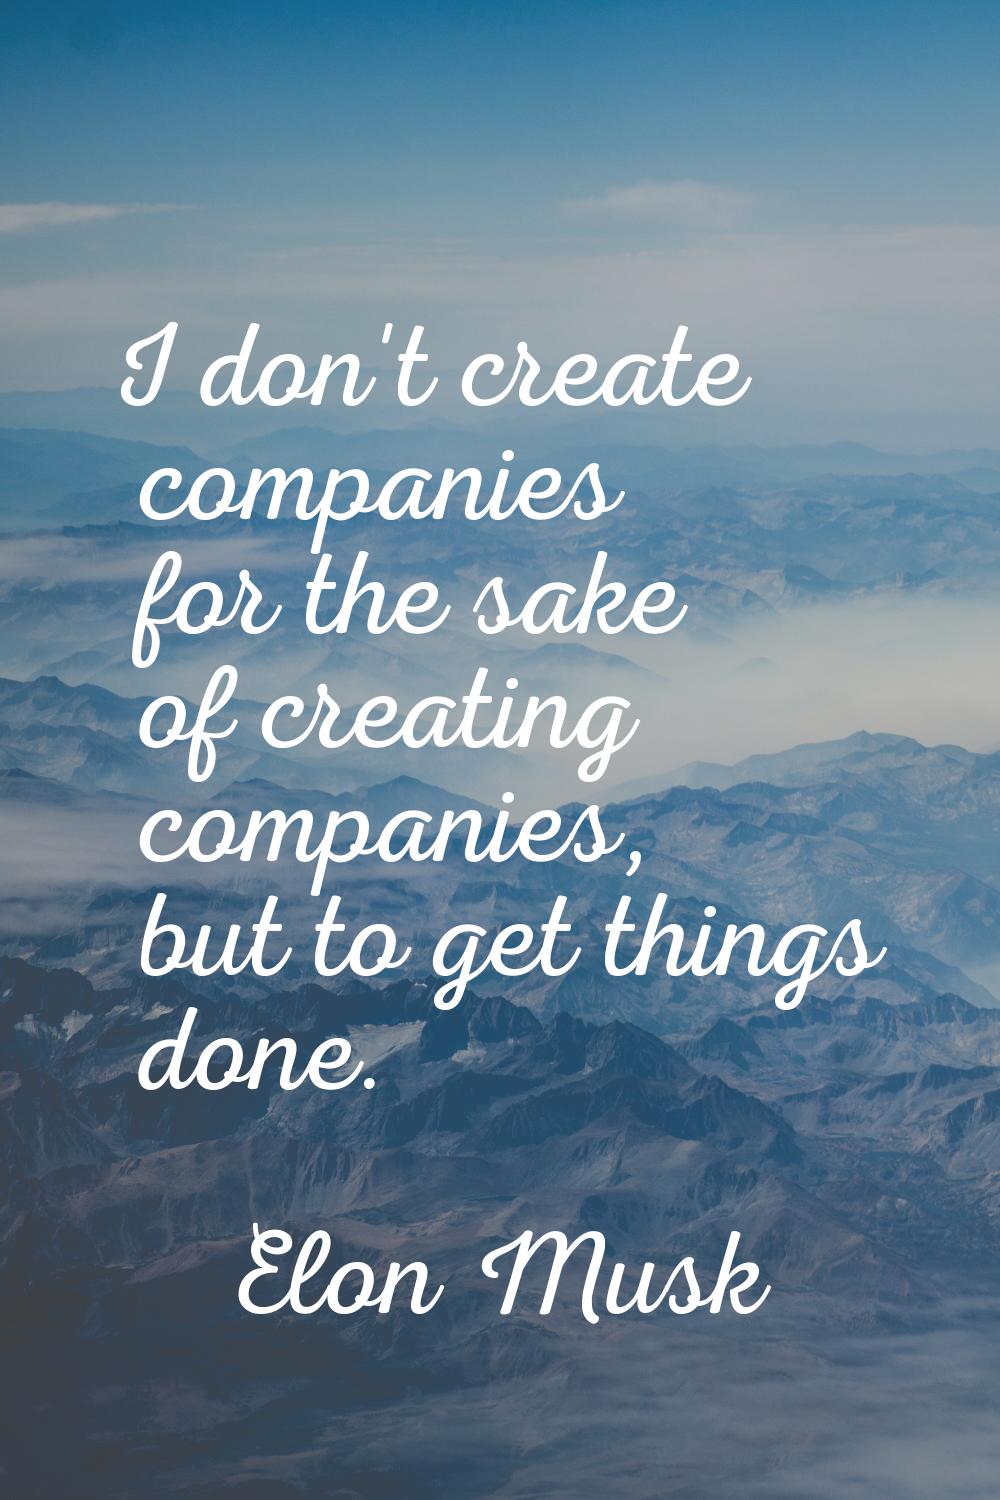 I don't create companies for the sake of creating companies, but to get things done.